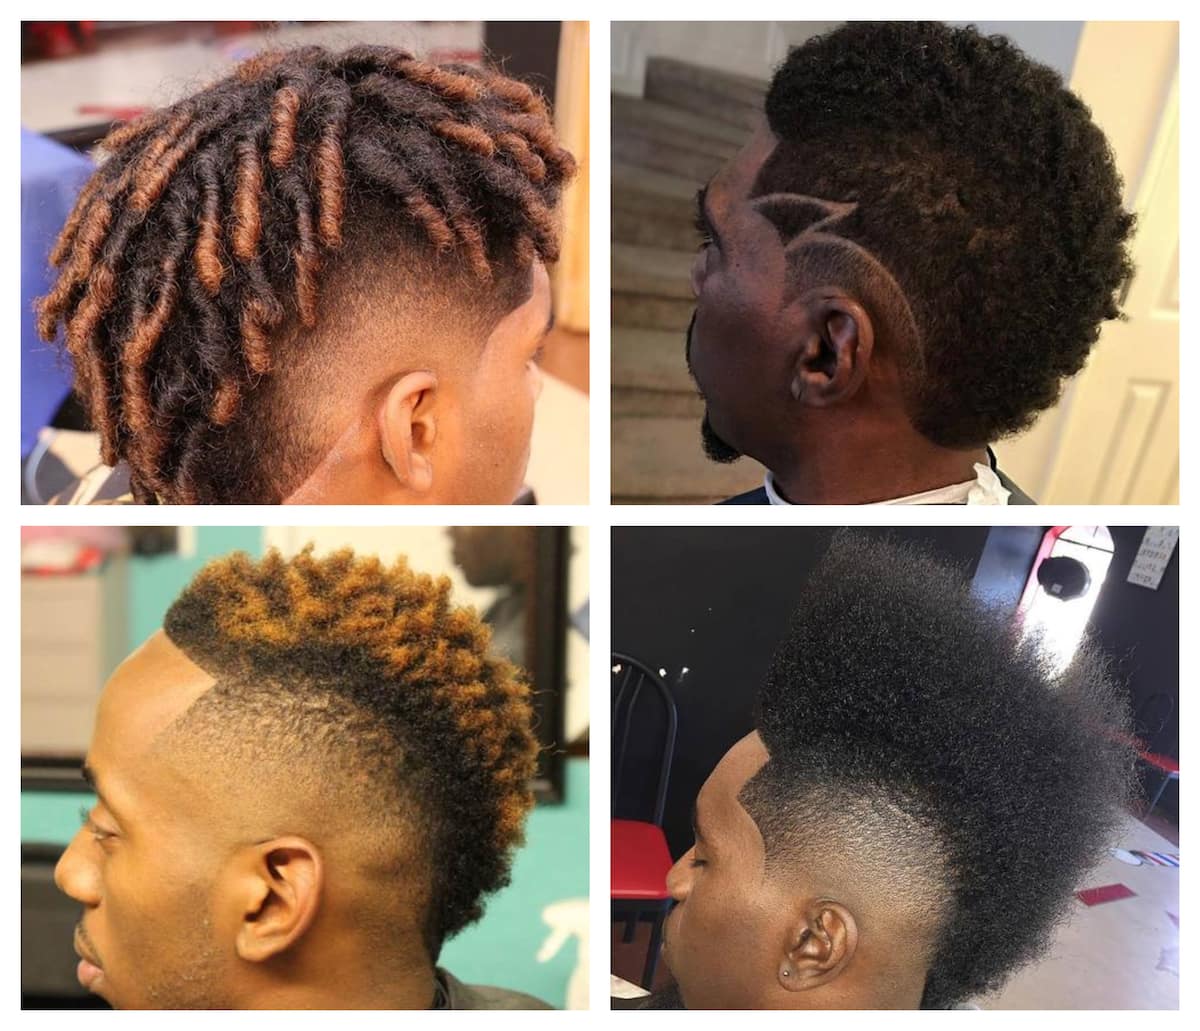 Rising haircut cost: Students now grow hair to cut cost - Vanguard News